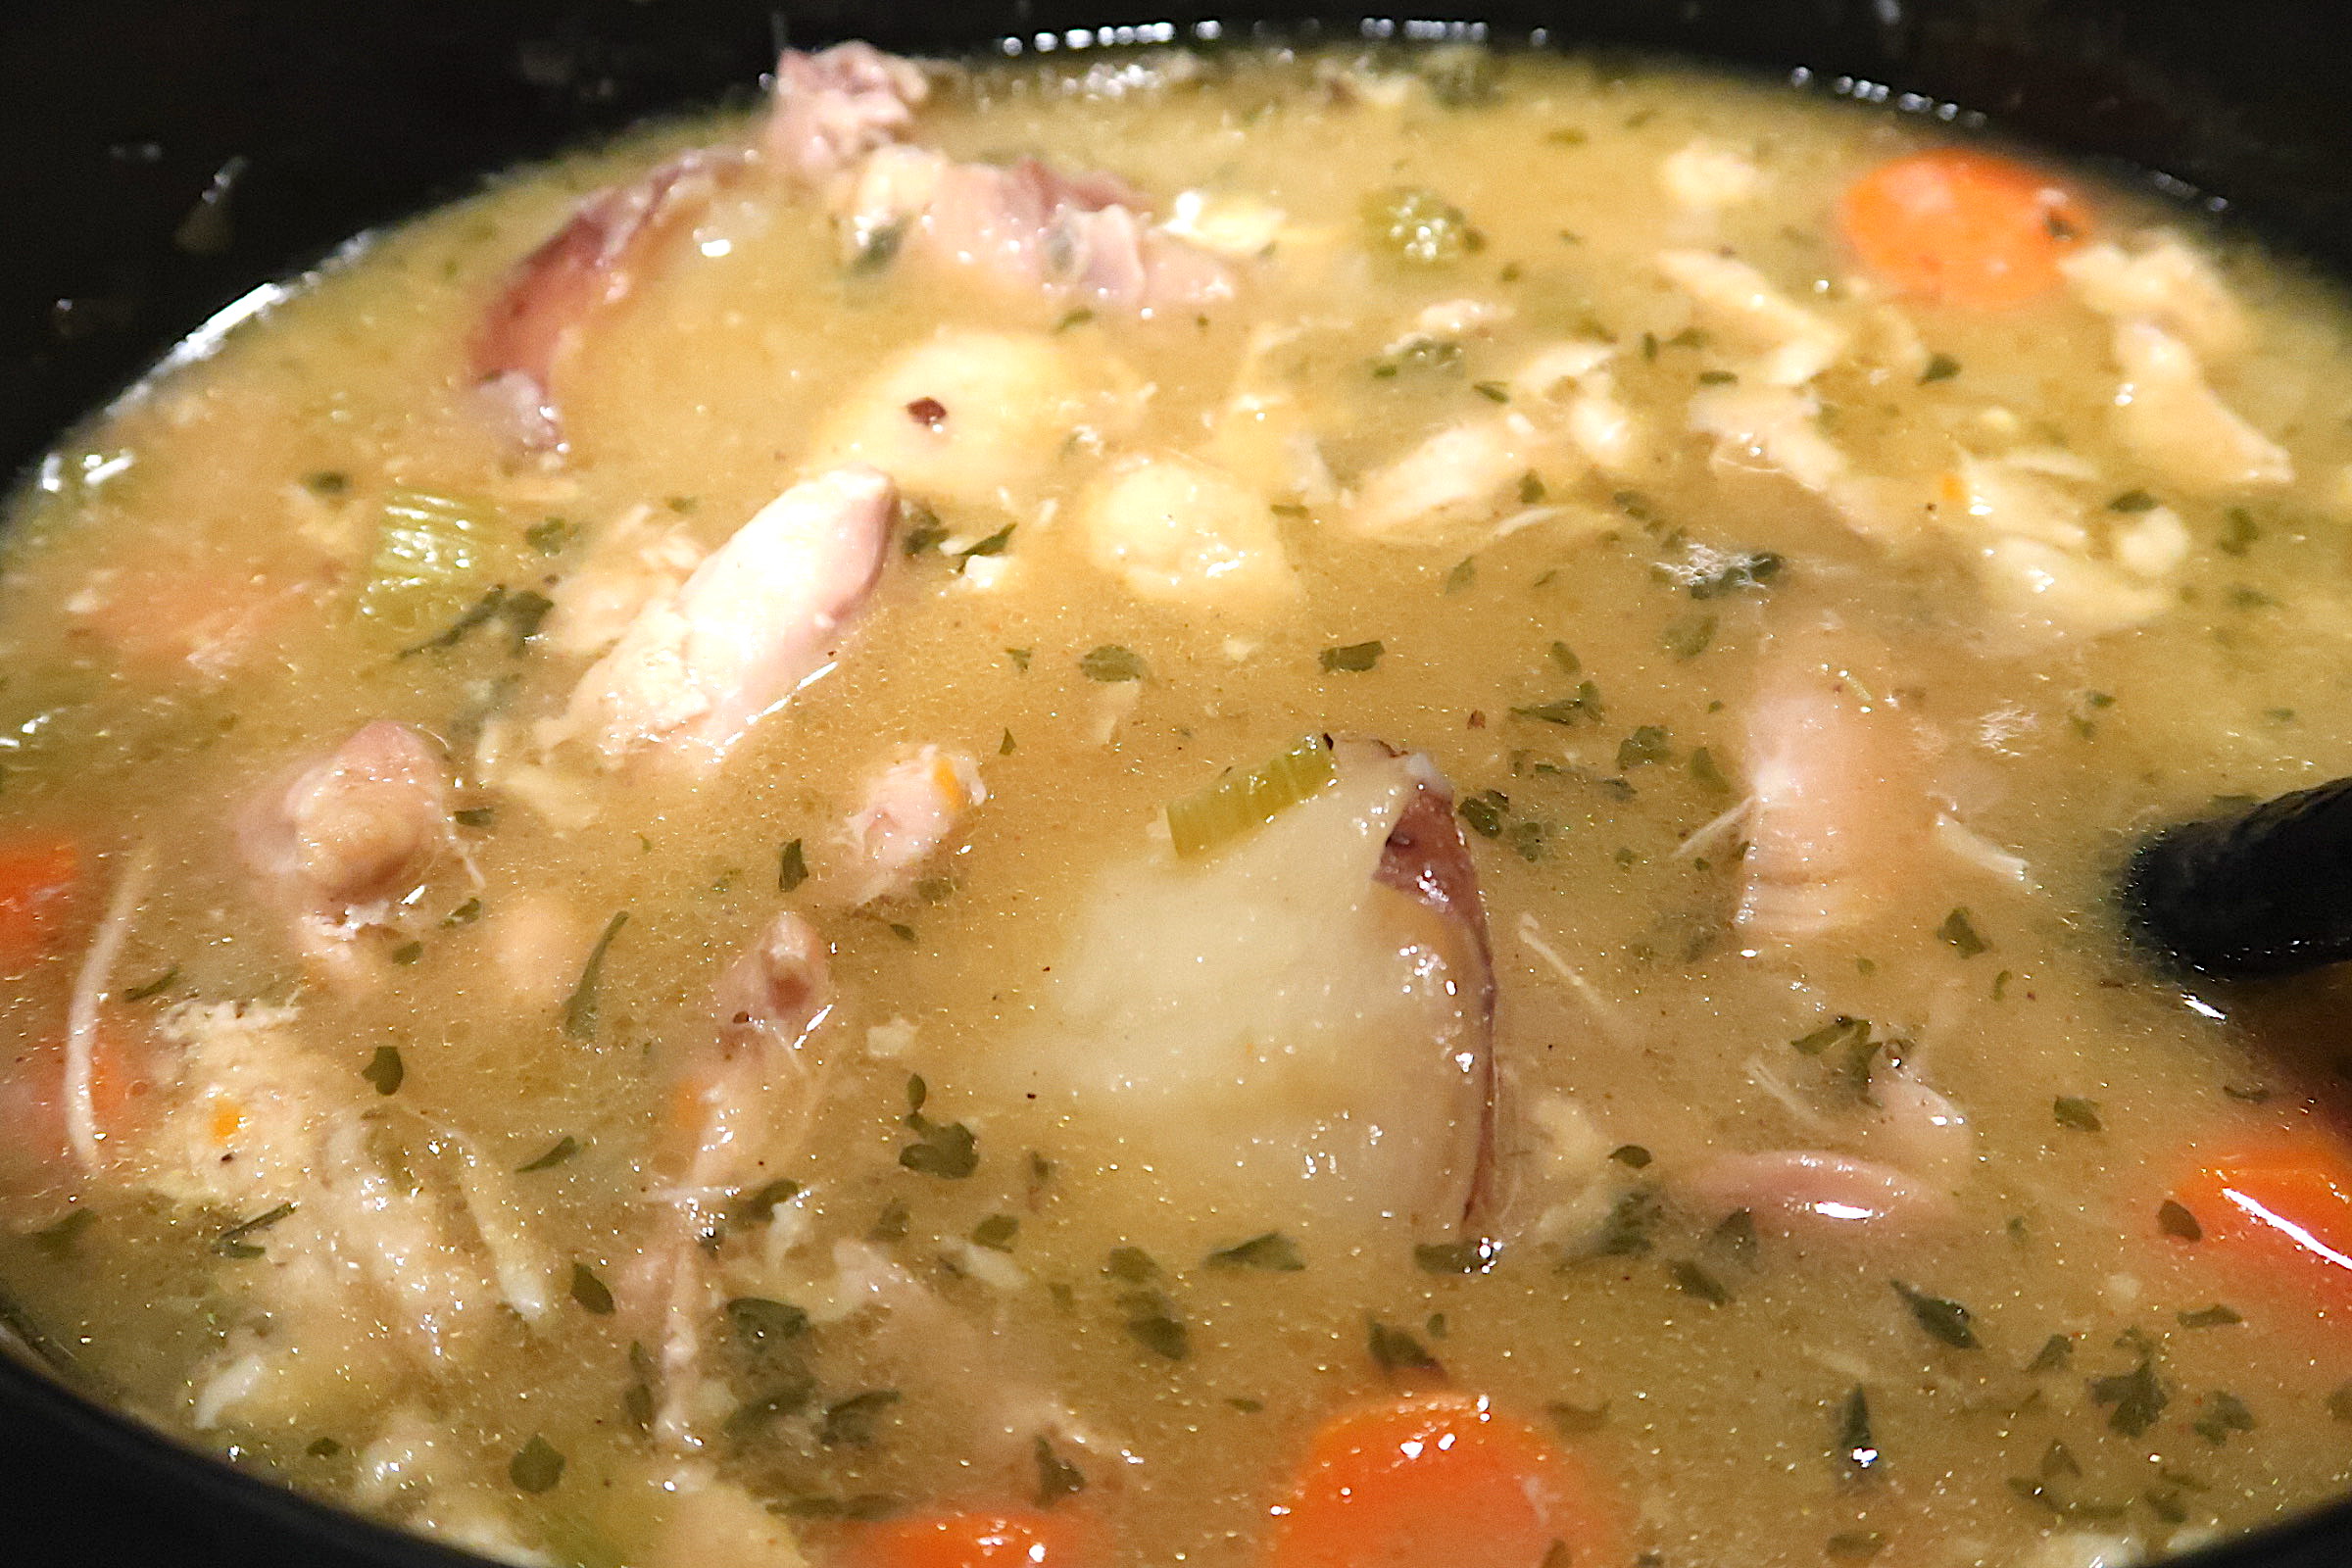 A slow cooker full of hearty chicken stew with chicken thighs, carrots, celery, onions, and potatoes slow cooked in a seasoned broth.